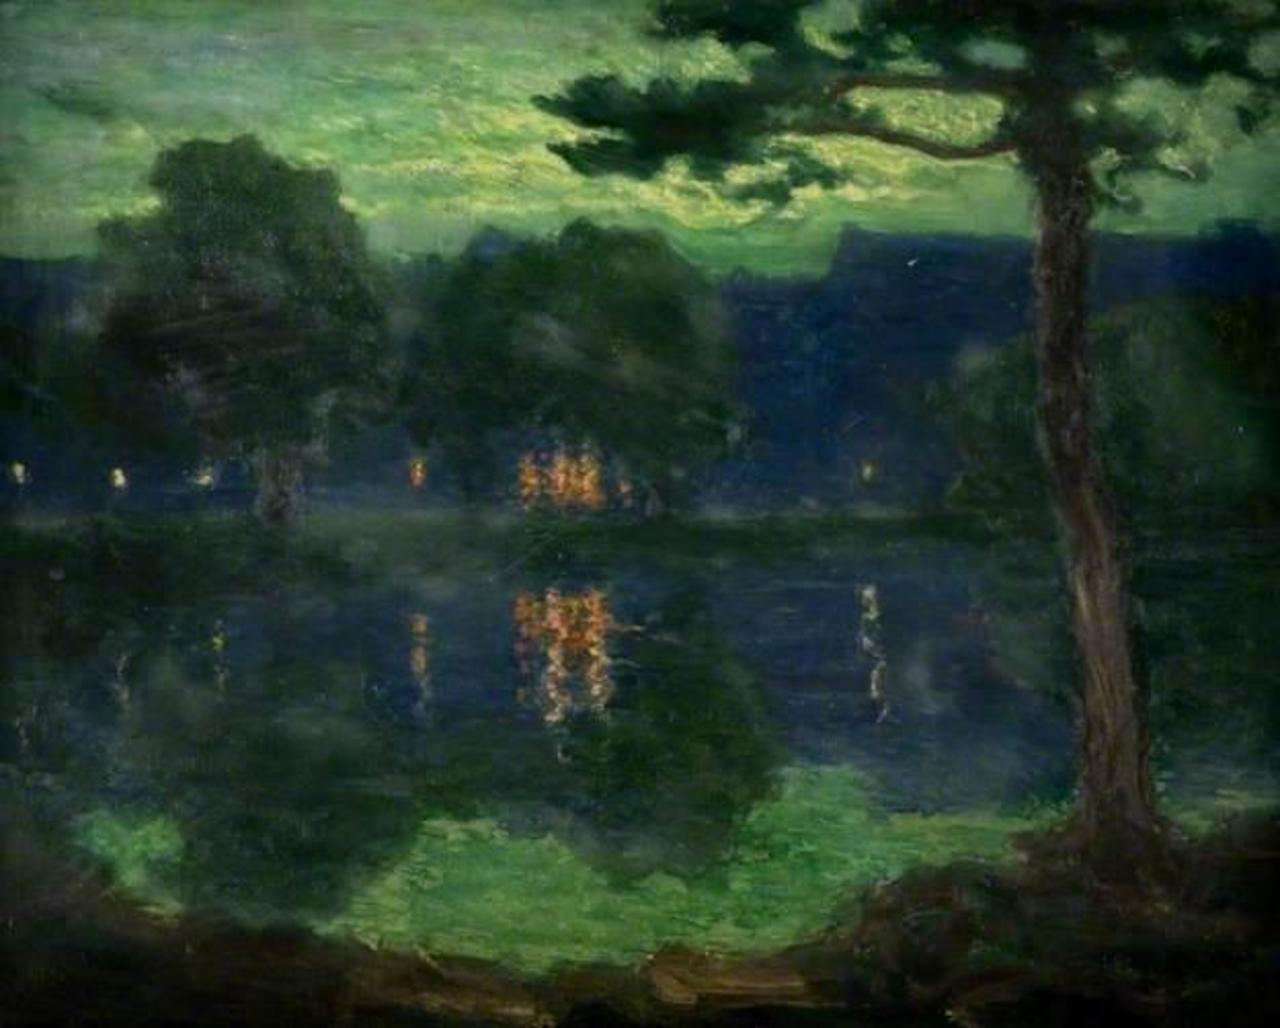 Barnes, Surrey by Twilight, by Frederick Francis Foottet #art http://t.co/wurZjkVvBQ